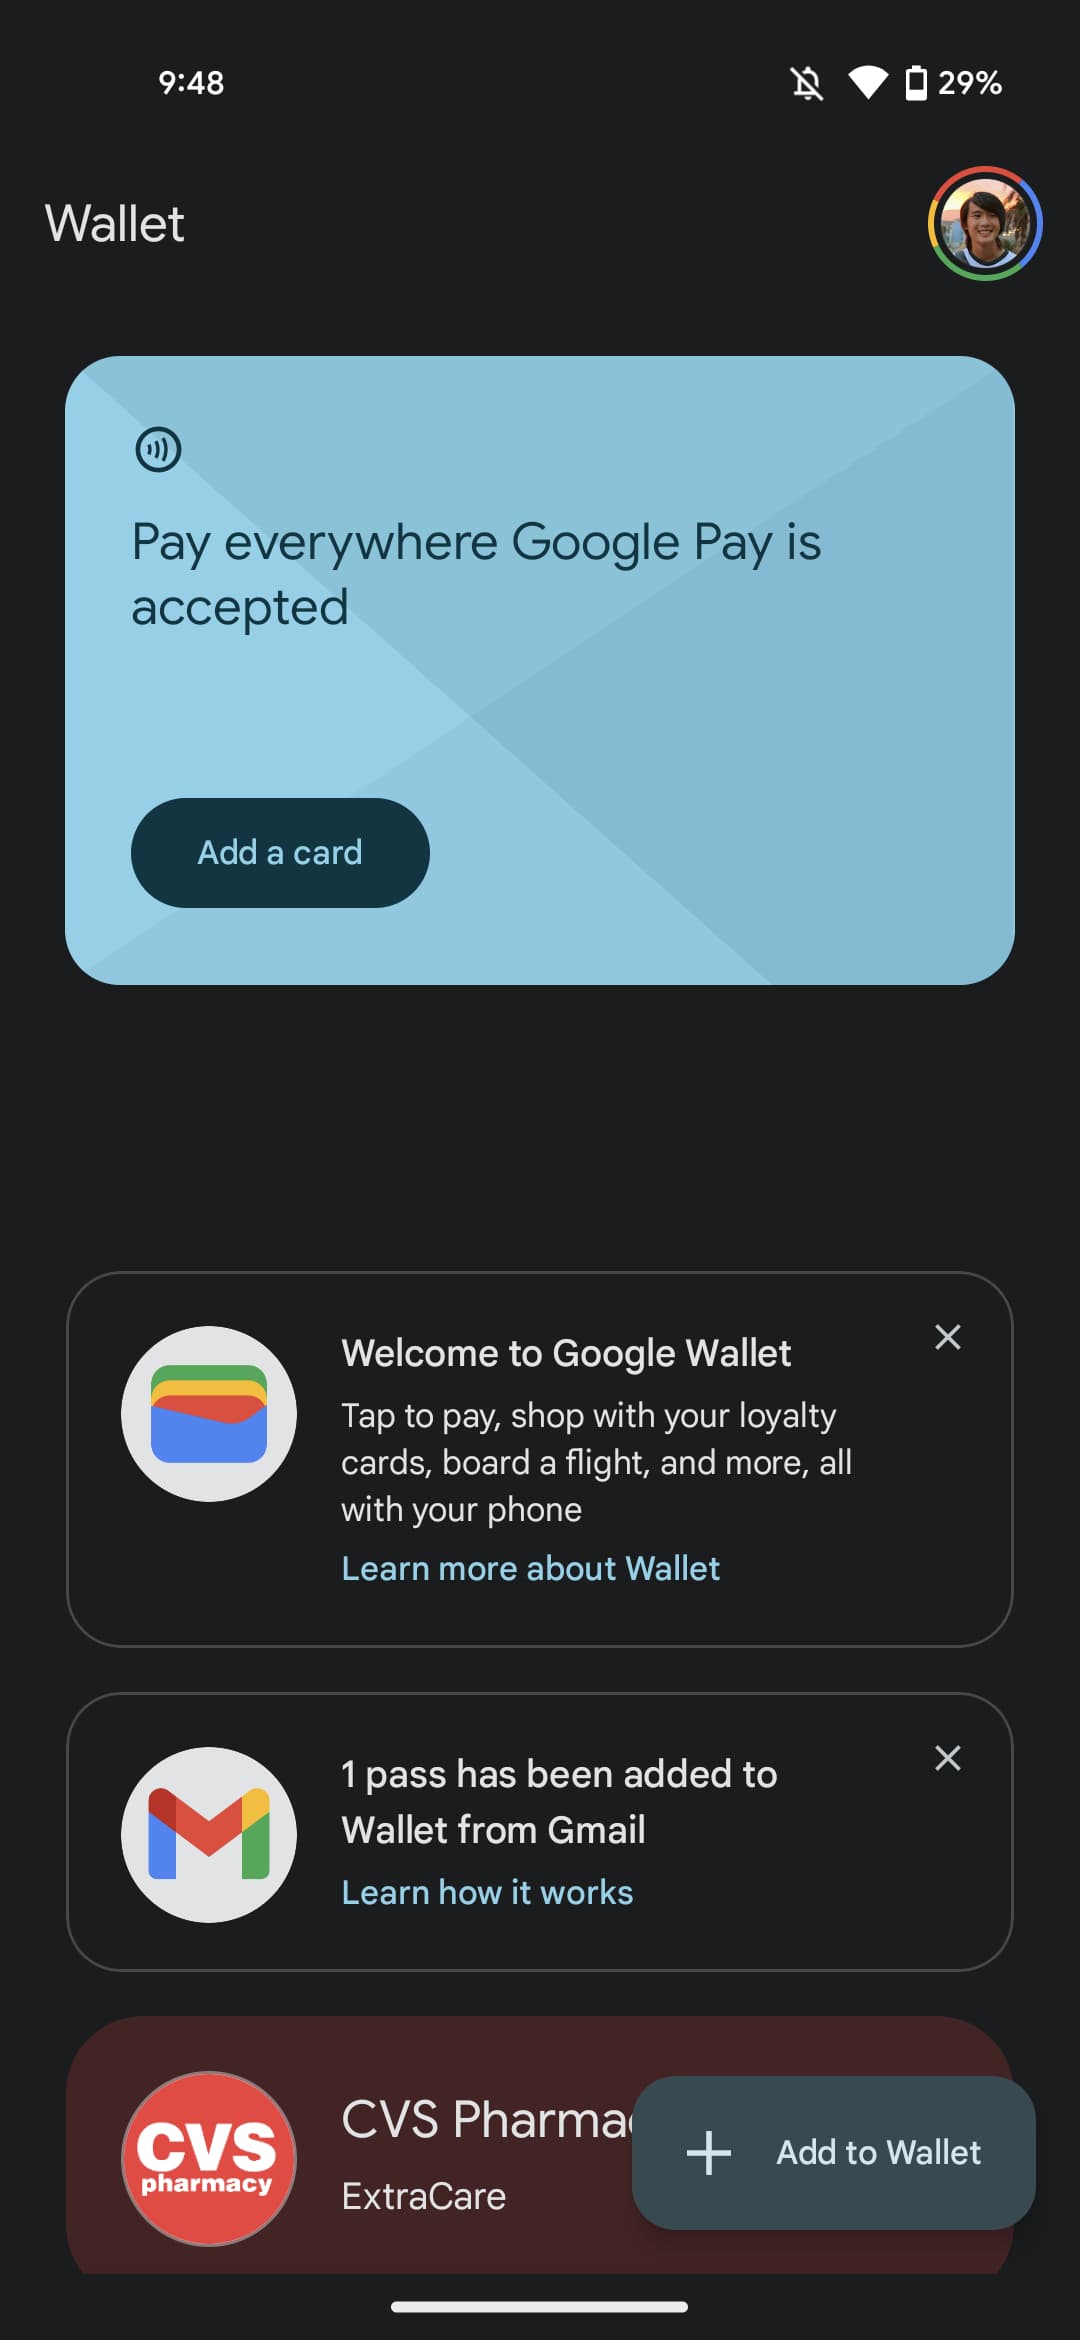 Google Wallet rolling out